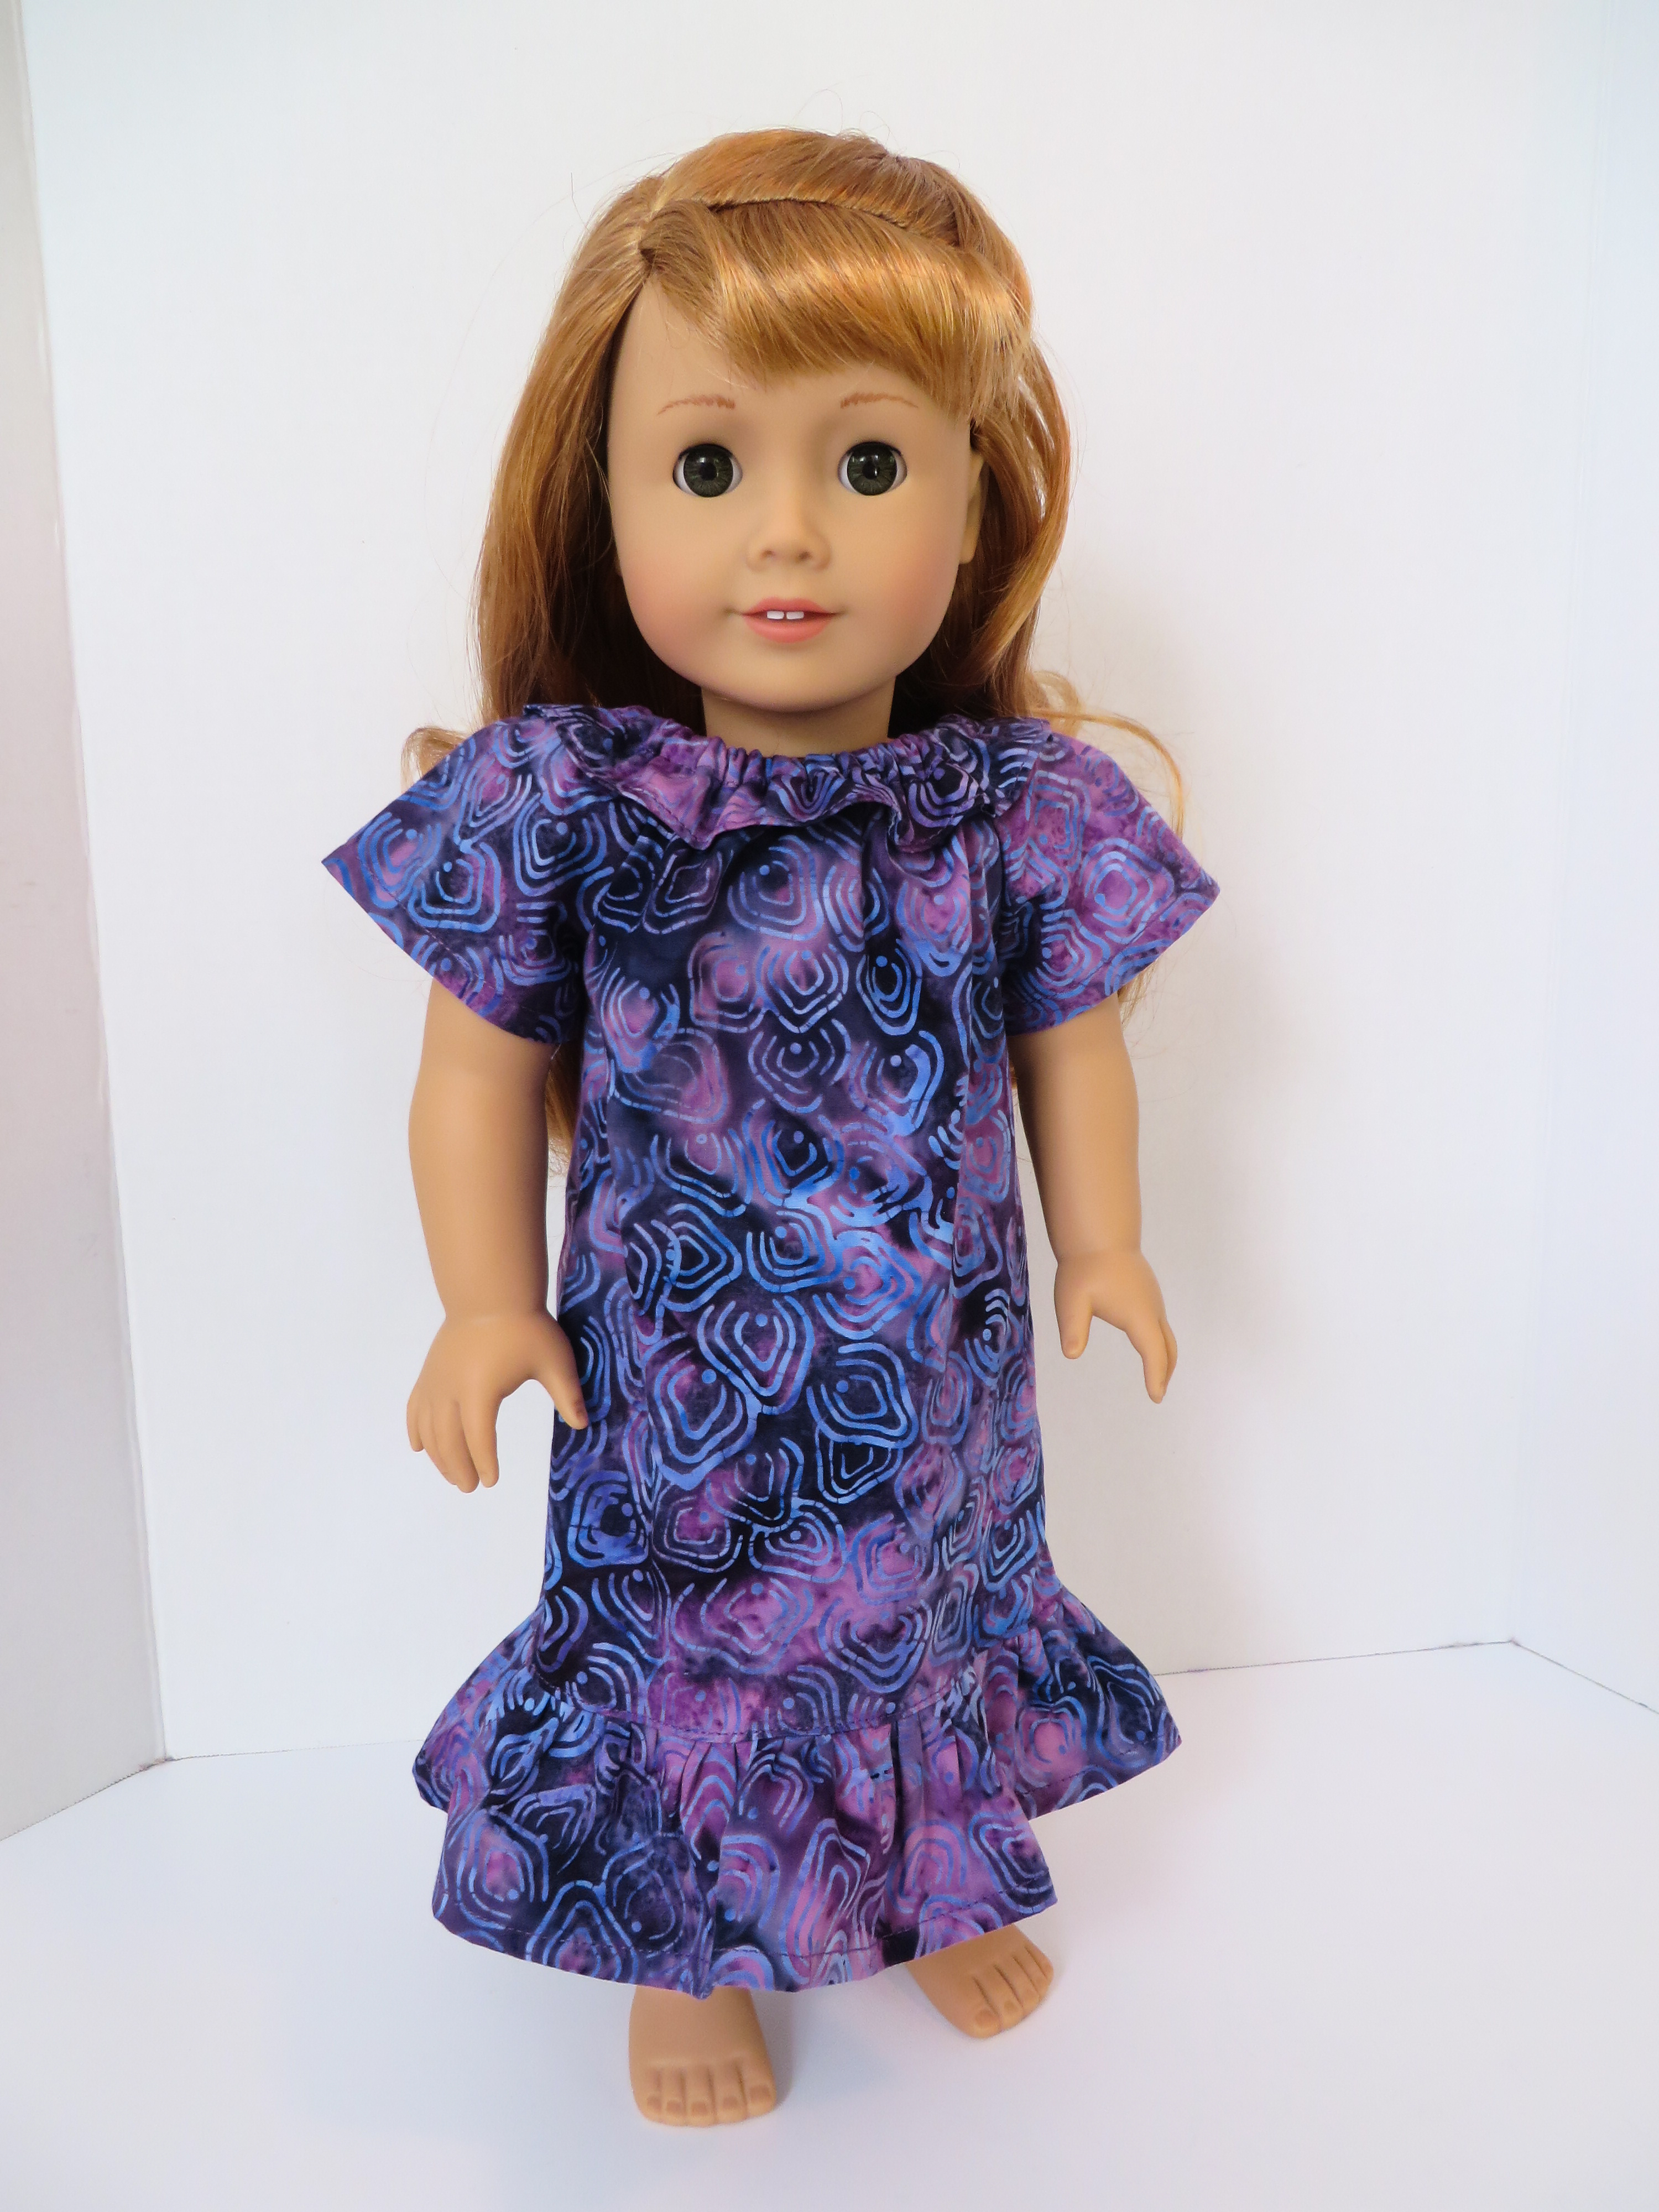 Make an easy, Hawaiian inspired MuuMuu doll dress for your 18 inch doll like Nanea. Easy Playtime Peasant Top sewing pattern tutorial by Oh Sew Kat! Visit www.ohsewkat.com for a free trial skirt pattern. #nanea #ohsewkat #sewingpattern #dollclothes #easy